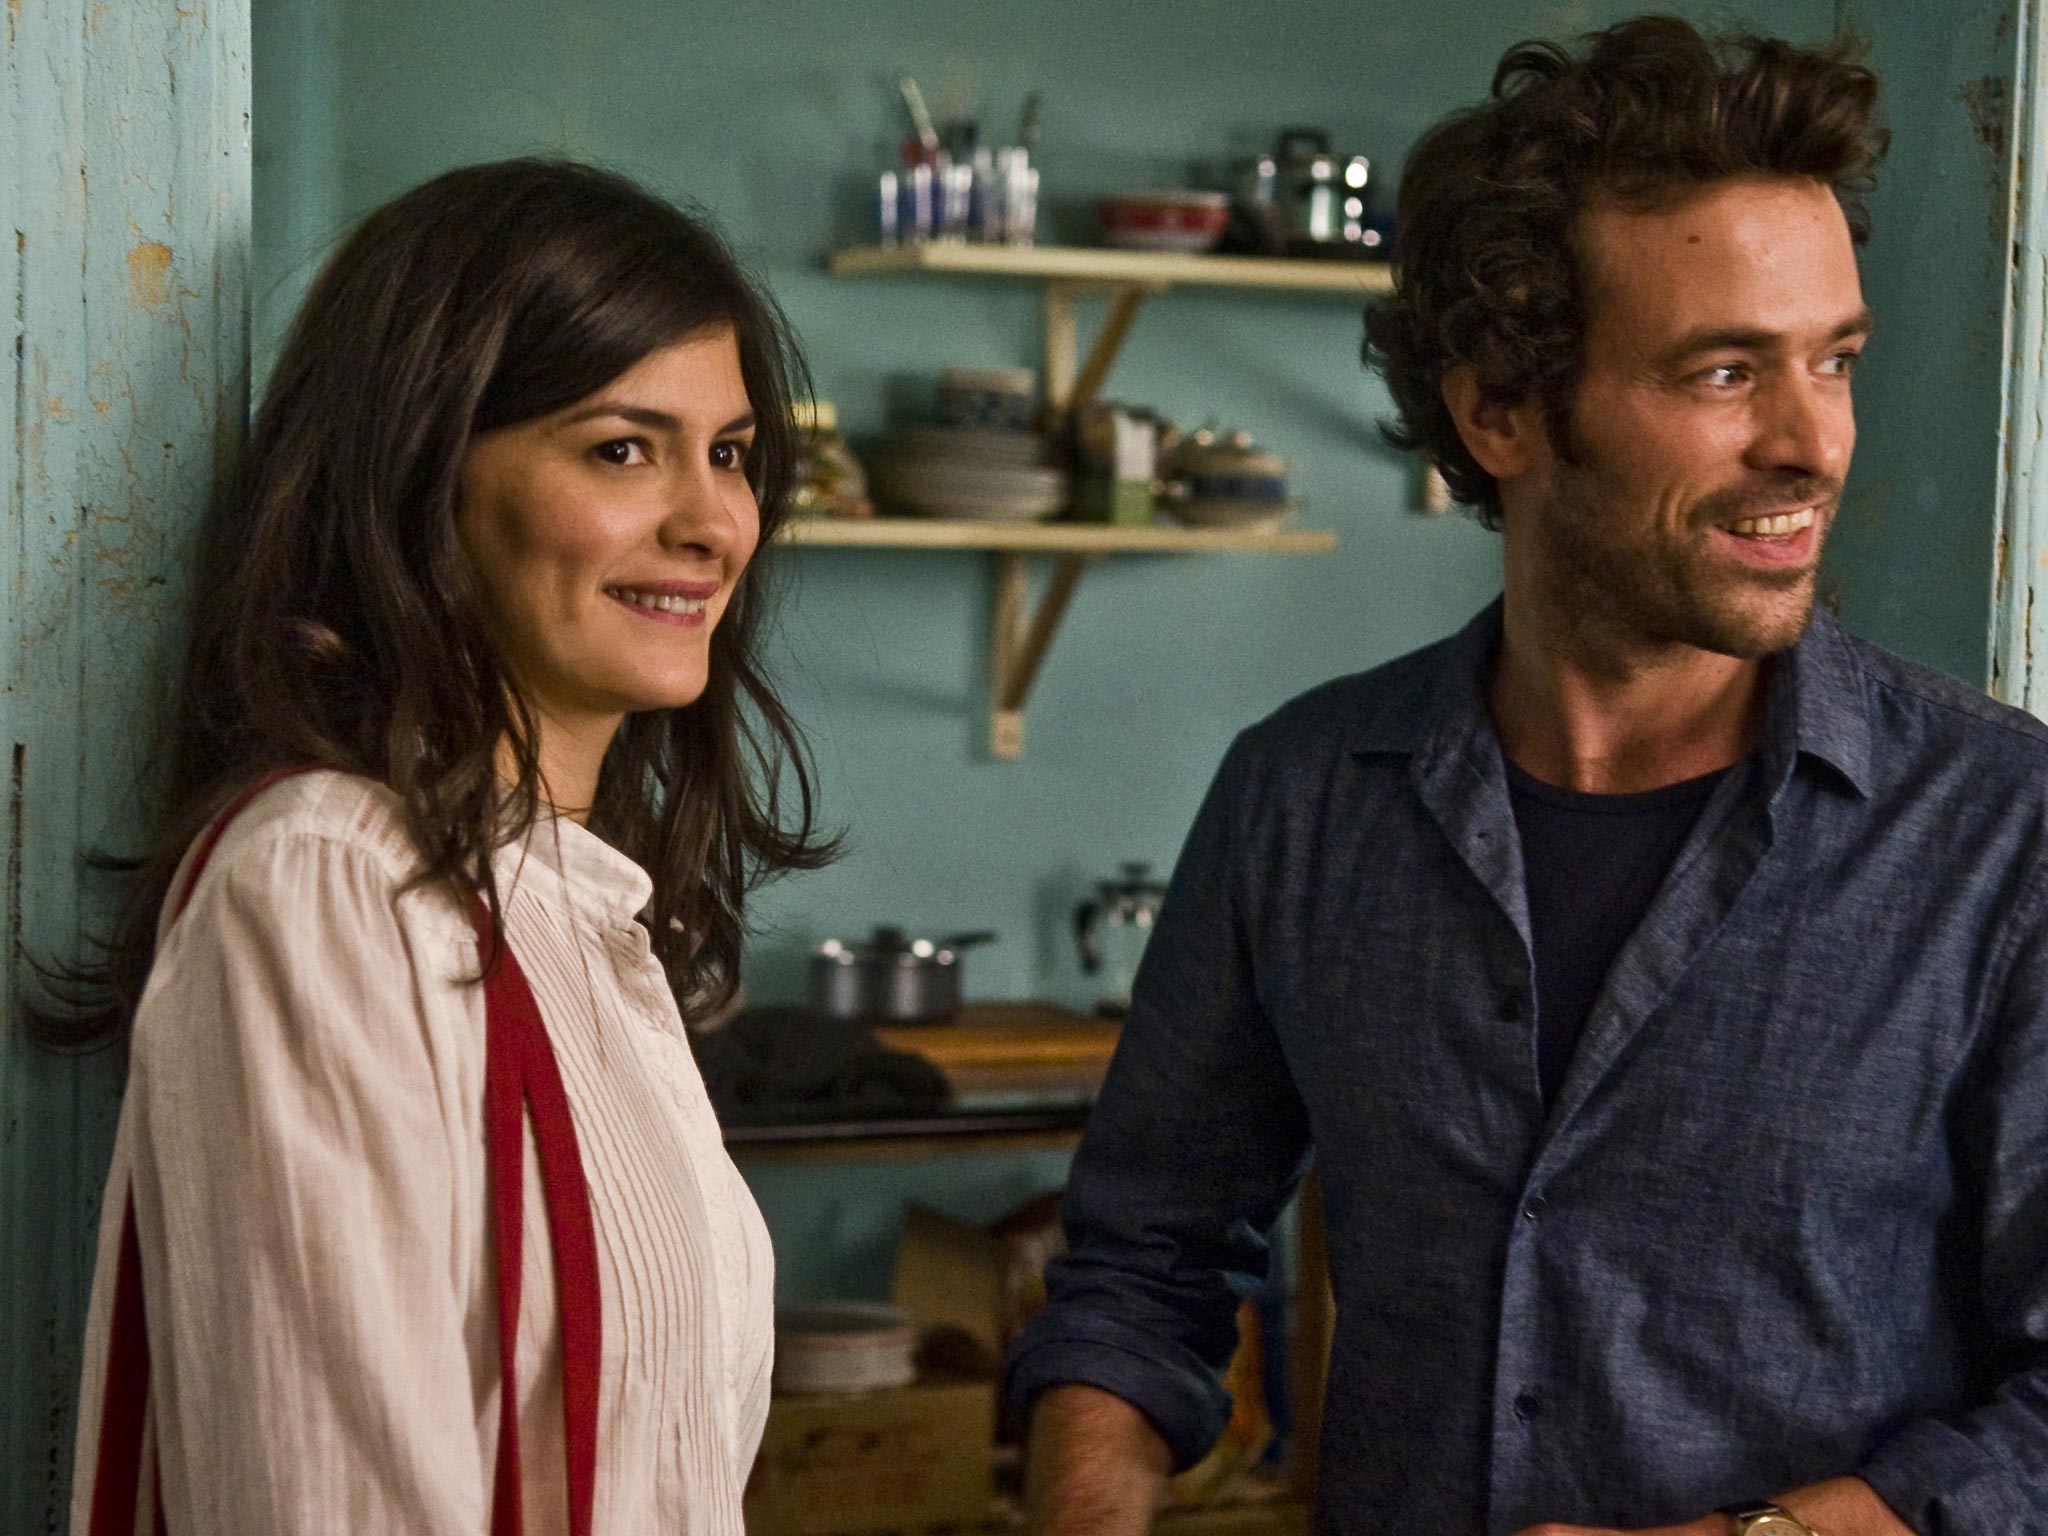 Love on the run: Audrey Tautou and Romain Duris star in
Cédric Klapisch’s freewheeling romance ‘Chinese Puzzle’